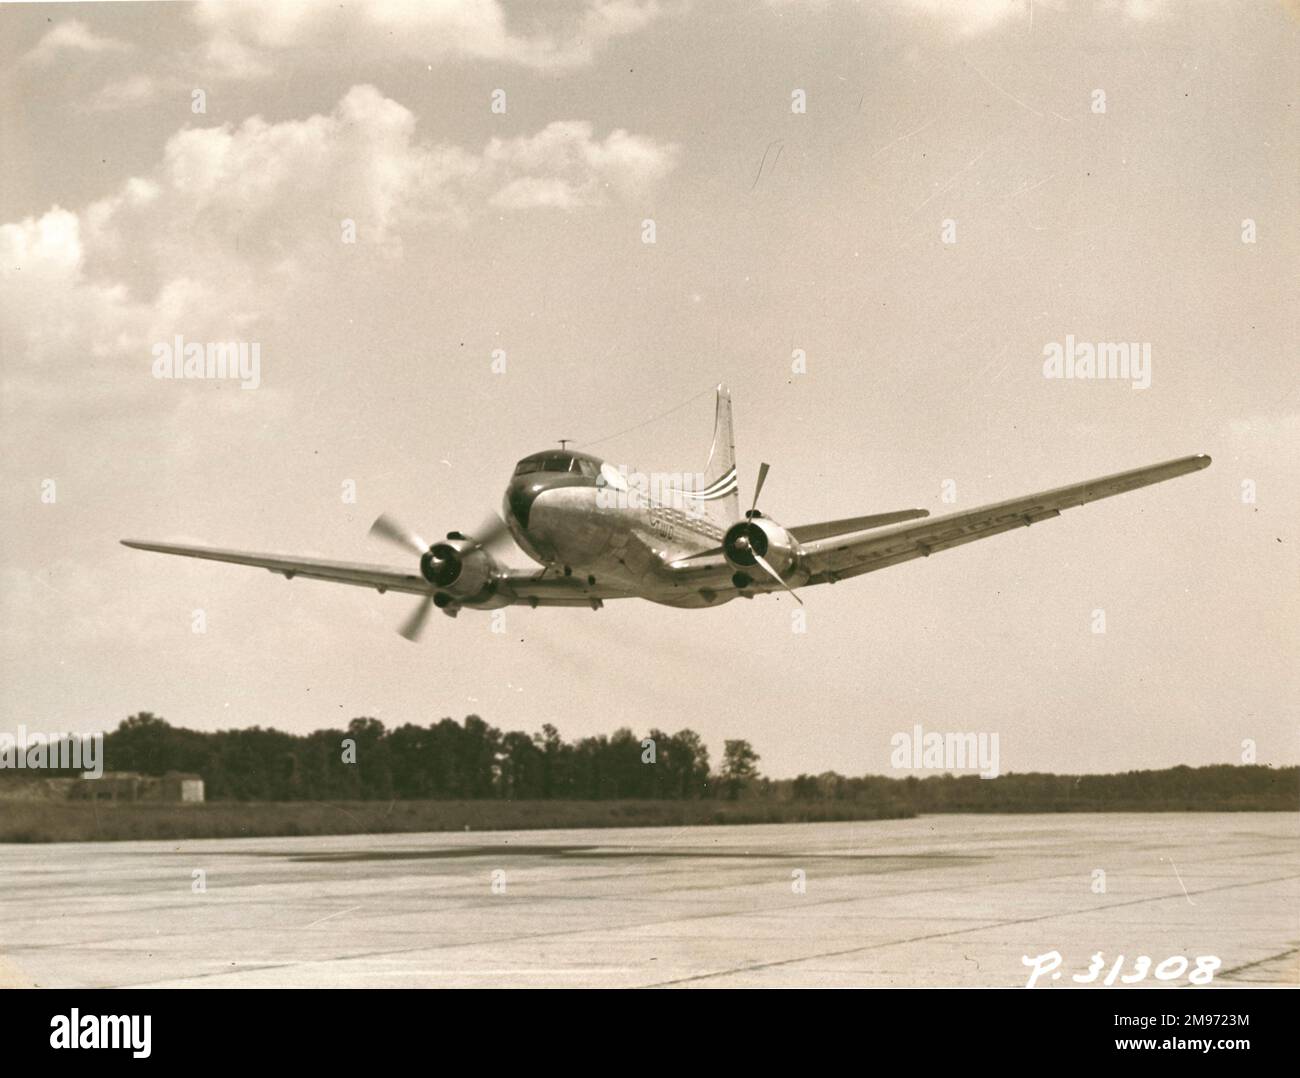 Pat Tibbs demonstrates the Martin 2-0-2 with its port propeller feathered on take-off at maximum gross weight. October 1947. Stock Photo